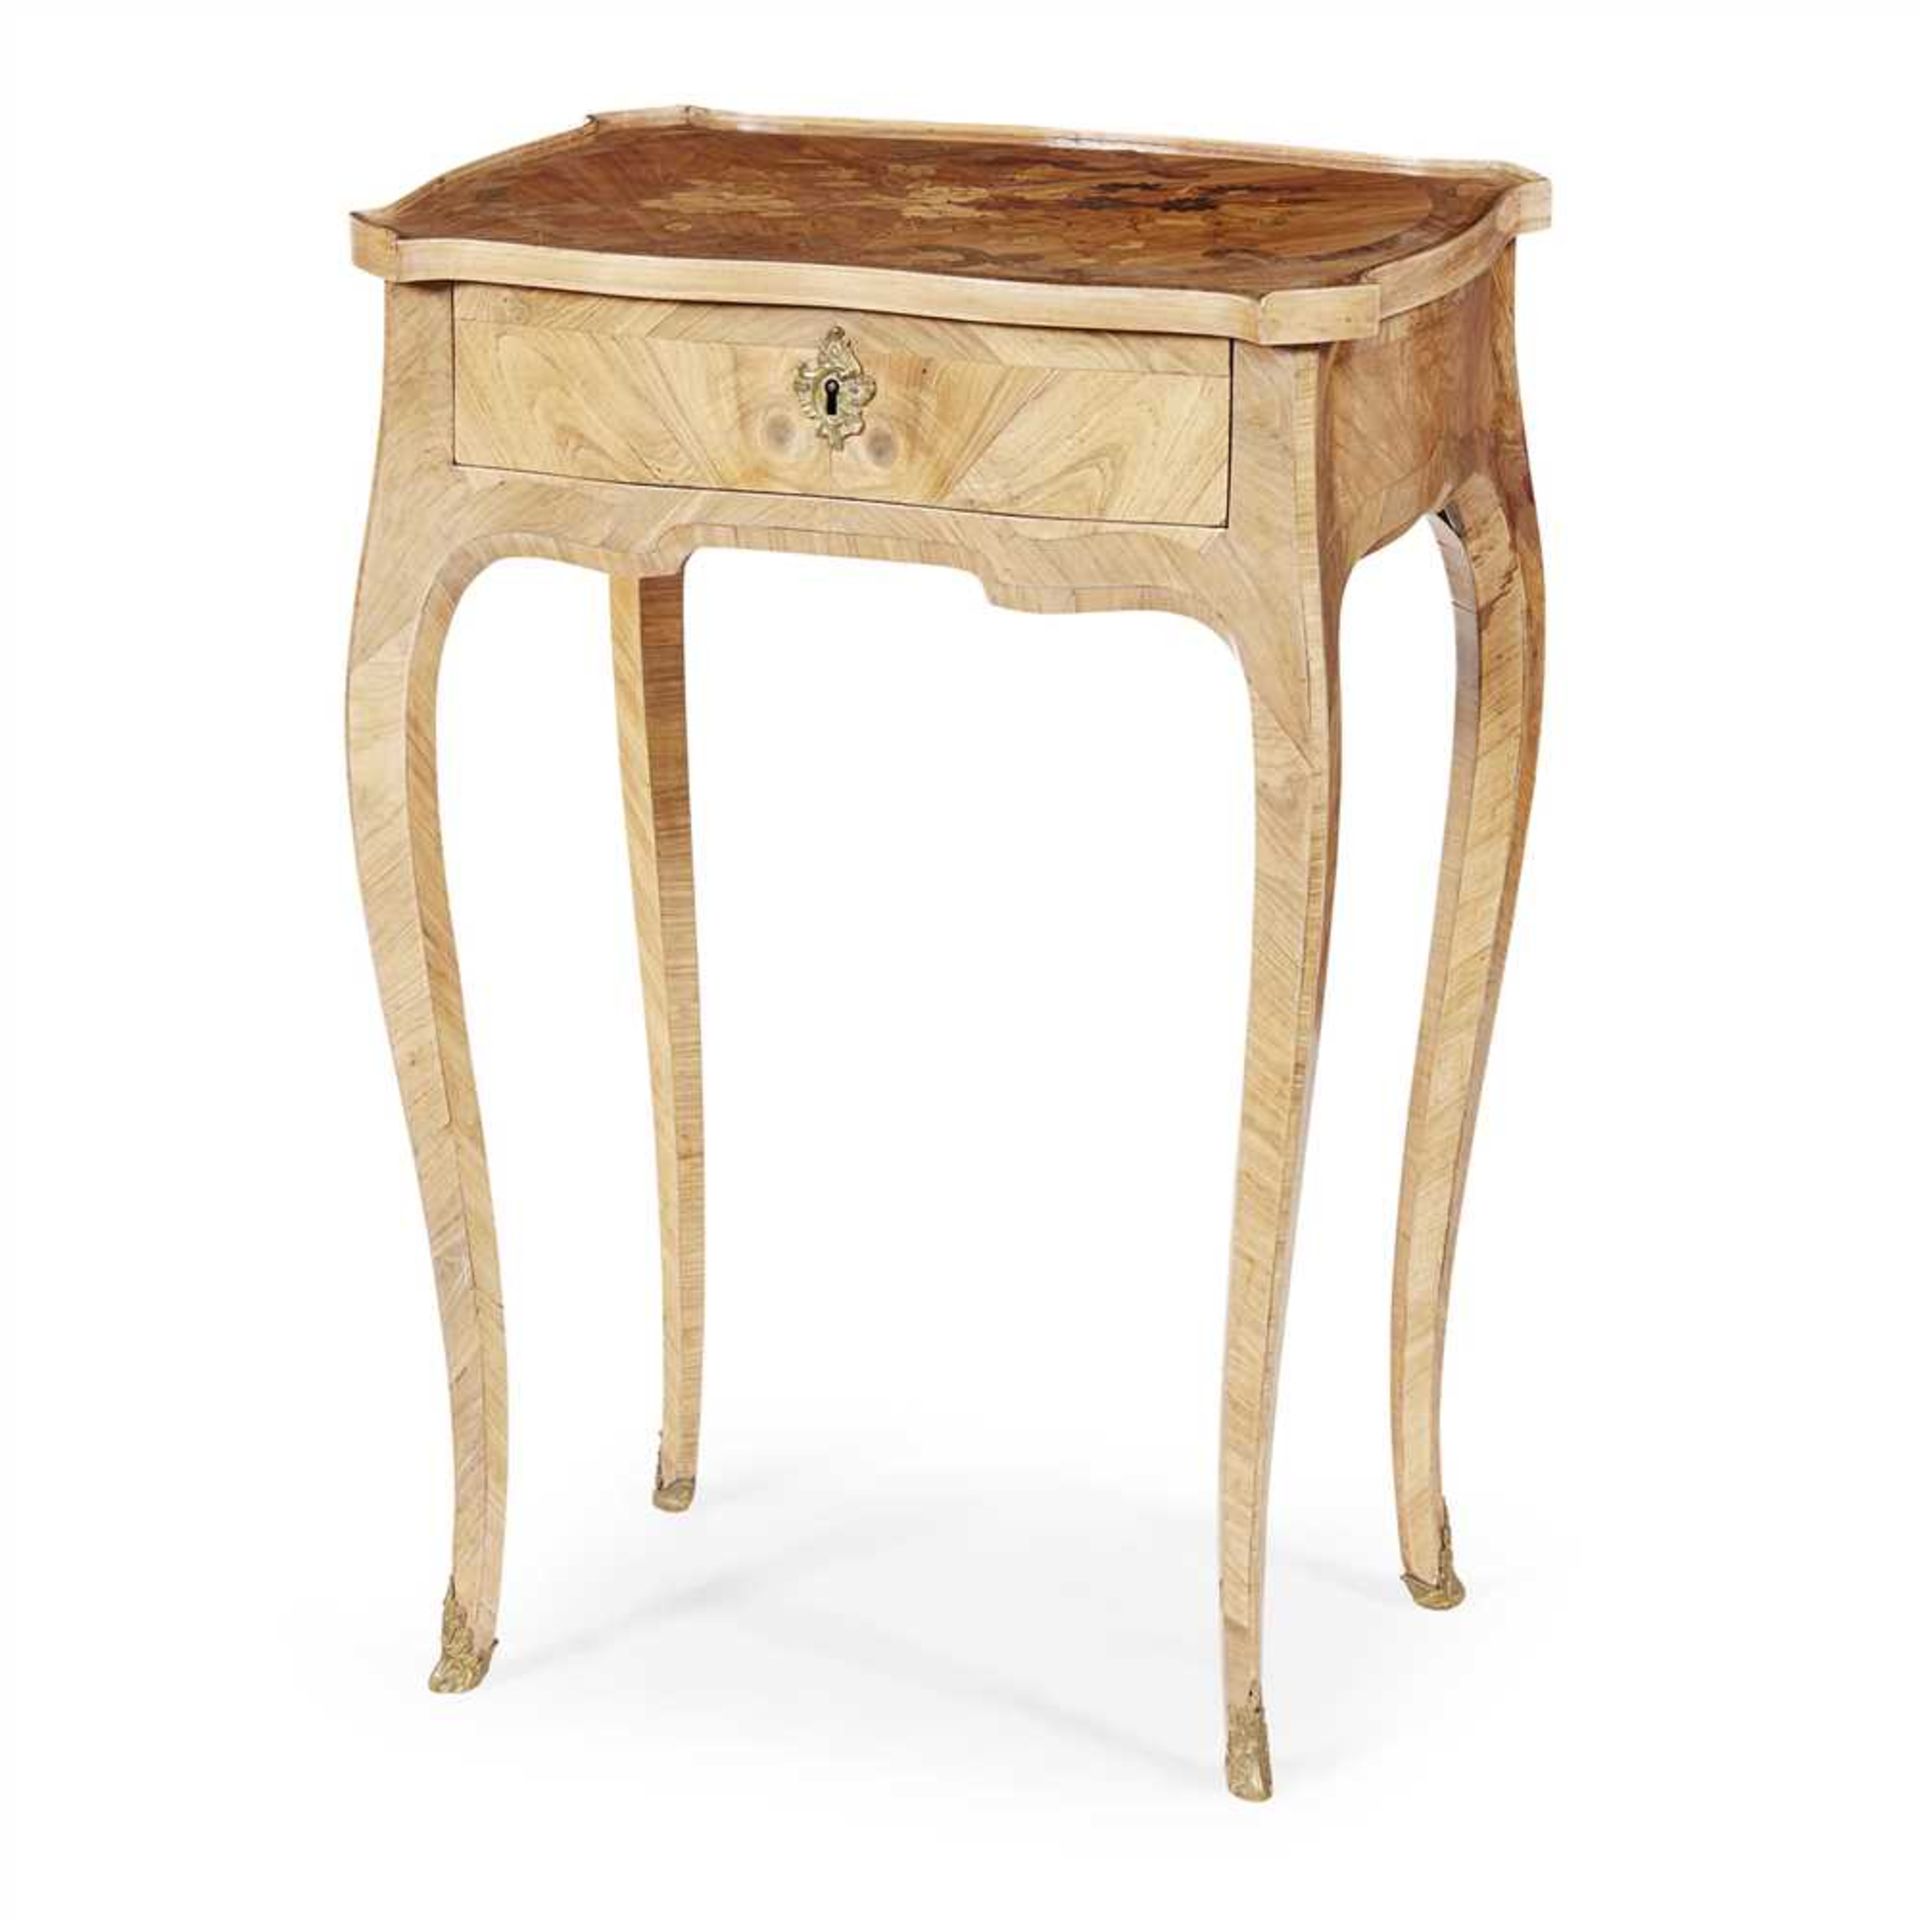 FRENCH KINGWOOD AND MARQUETRY TABLE A ECRIRE LATE 19TH CENTURY